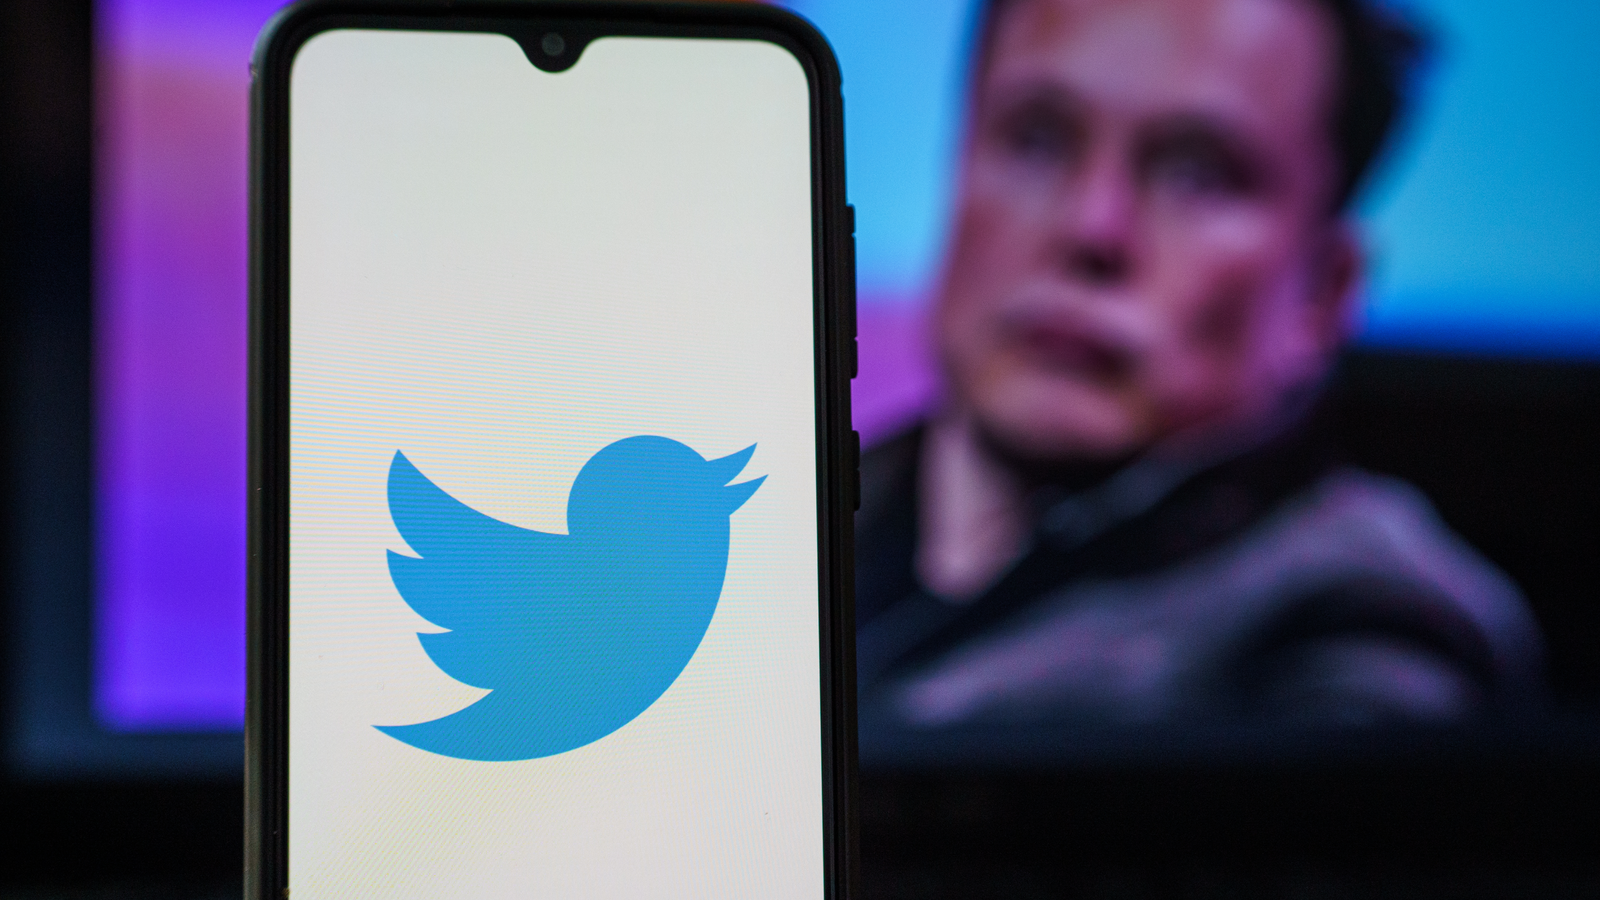 Twitter Layoffs (TWTR) logo on smartphone and Elon Musk in the background.